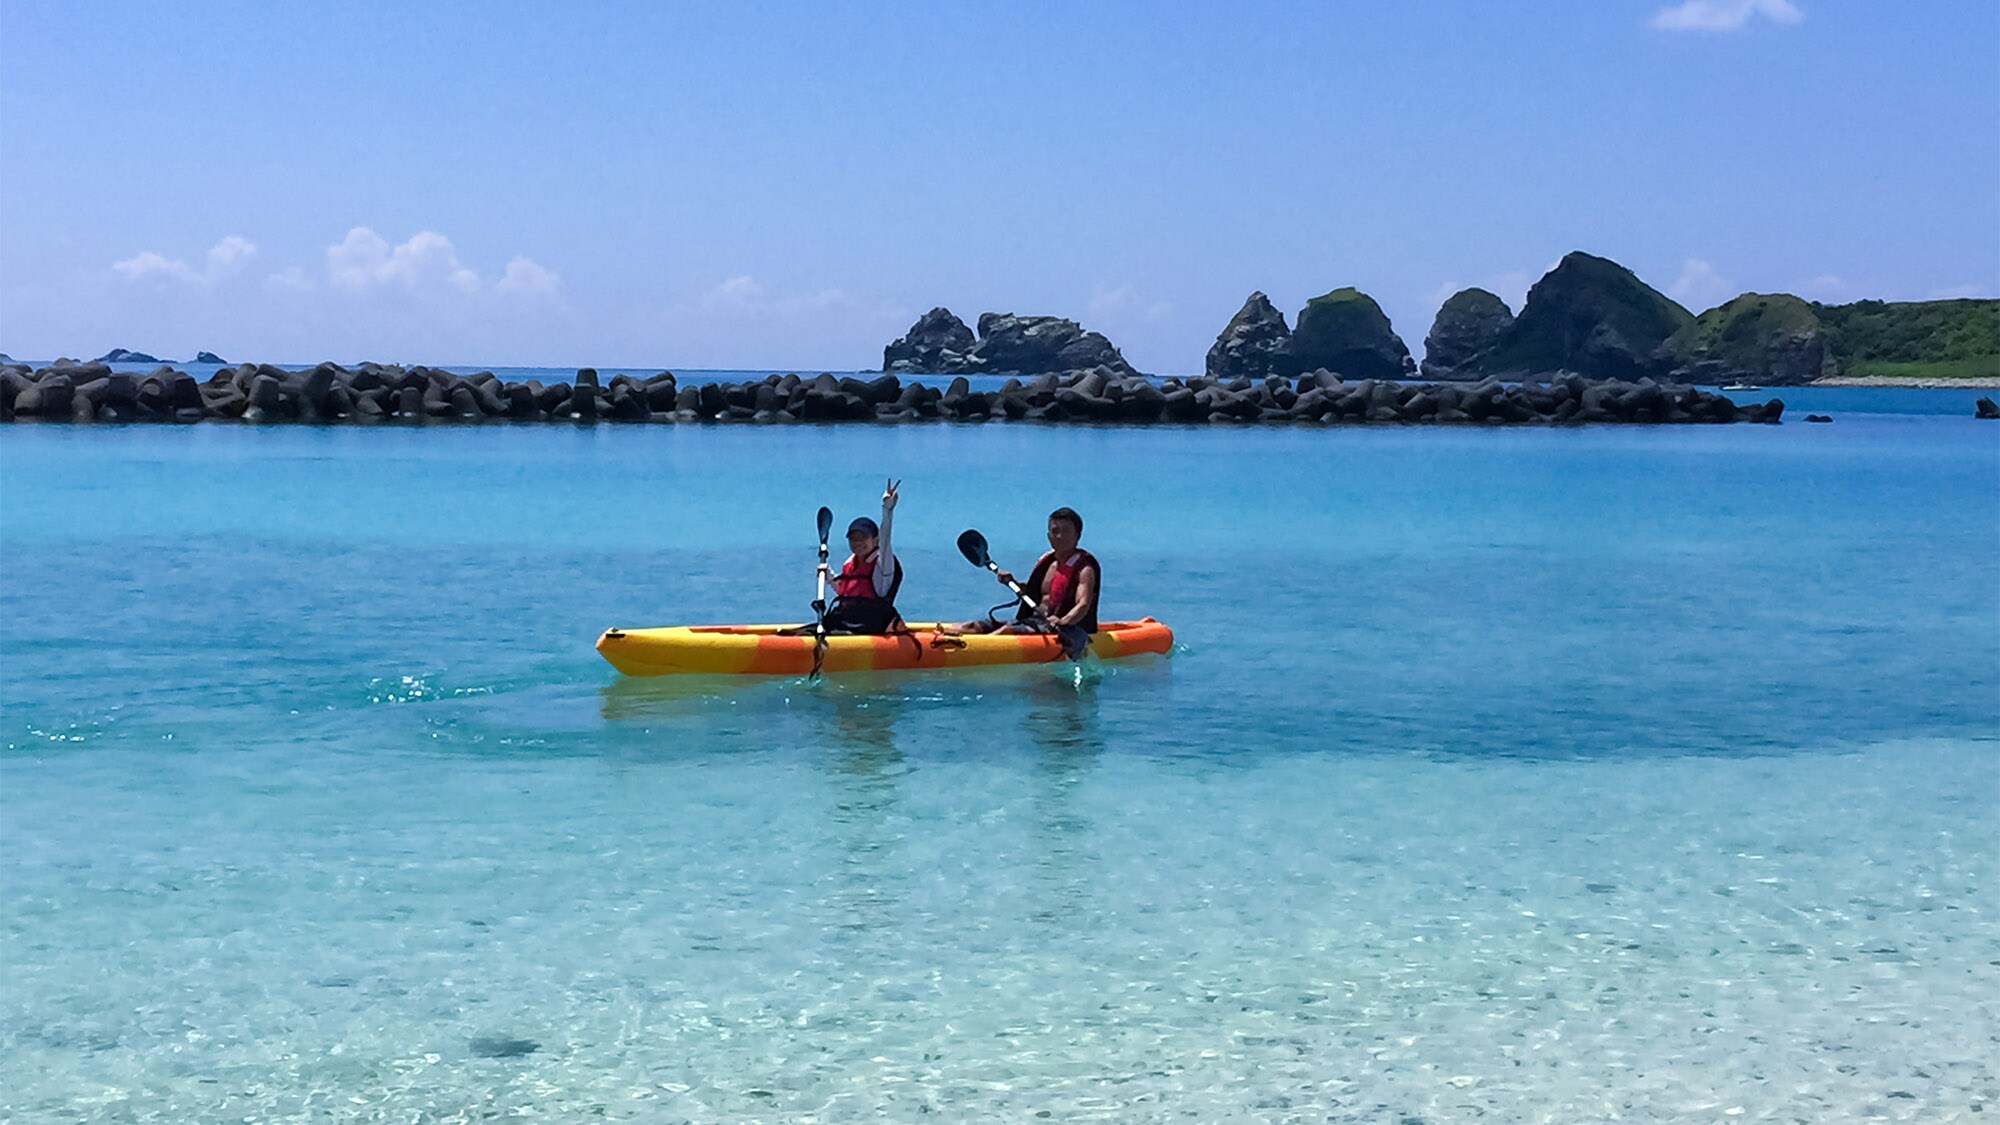 ・ The beach is right in front of you! Please contact us in advance for rentals such as sea kayaking.